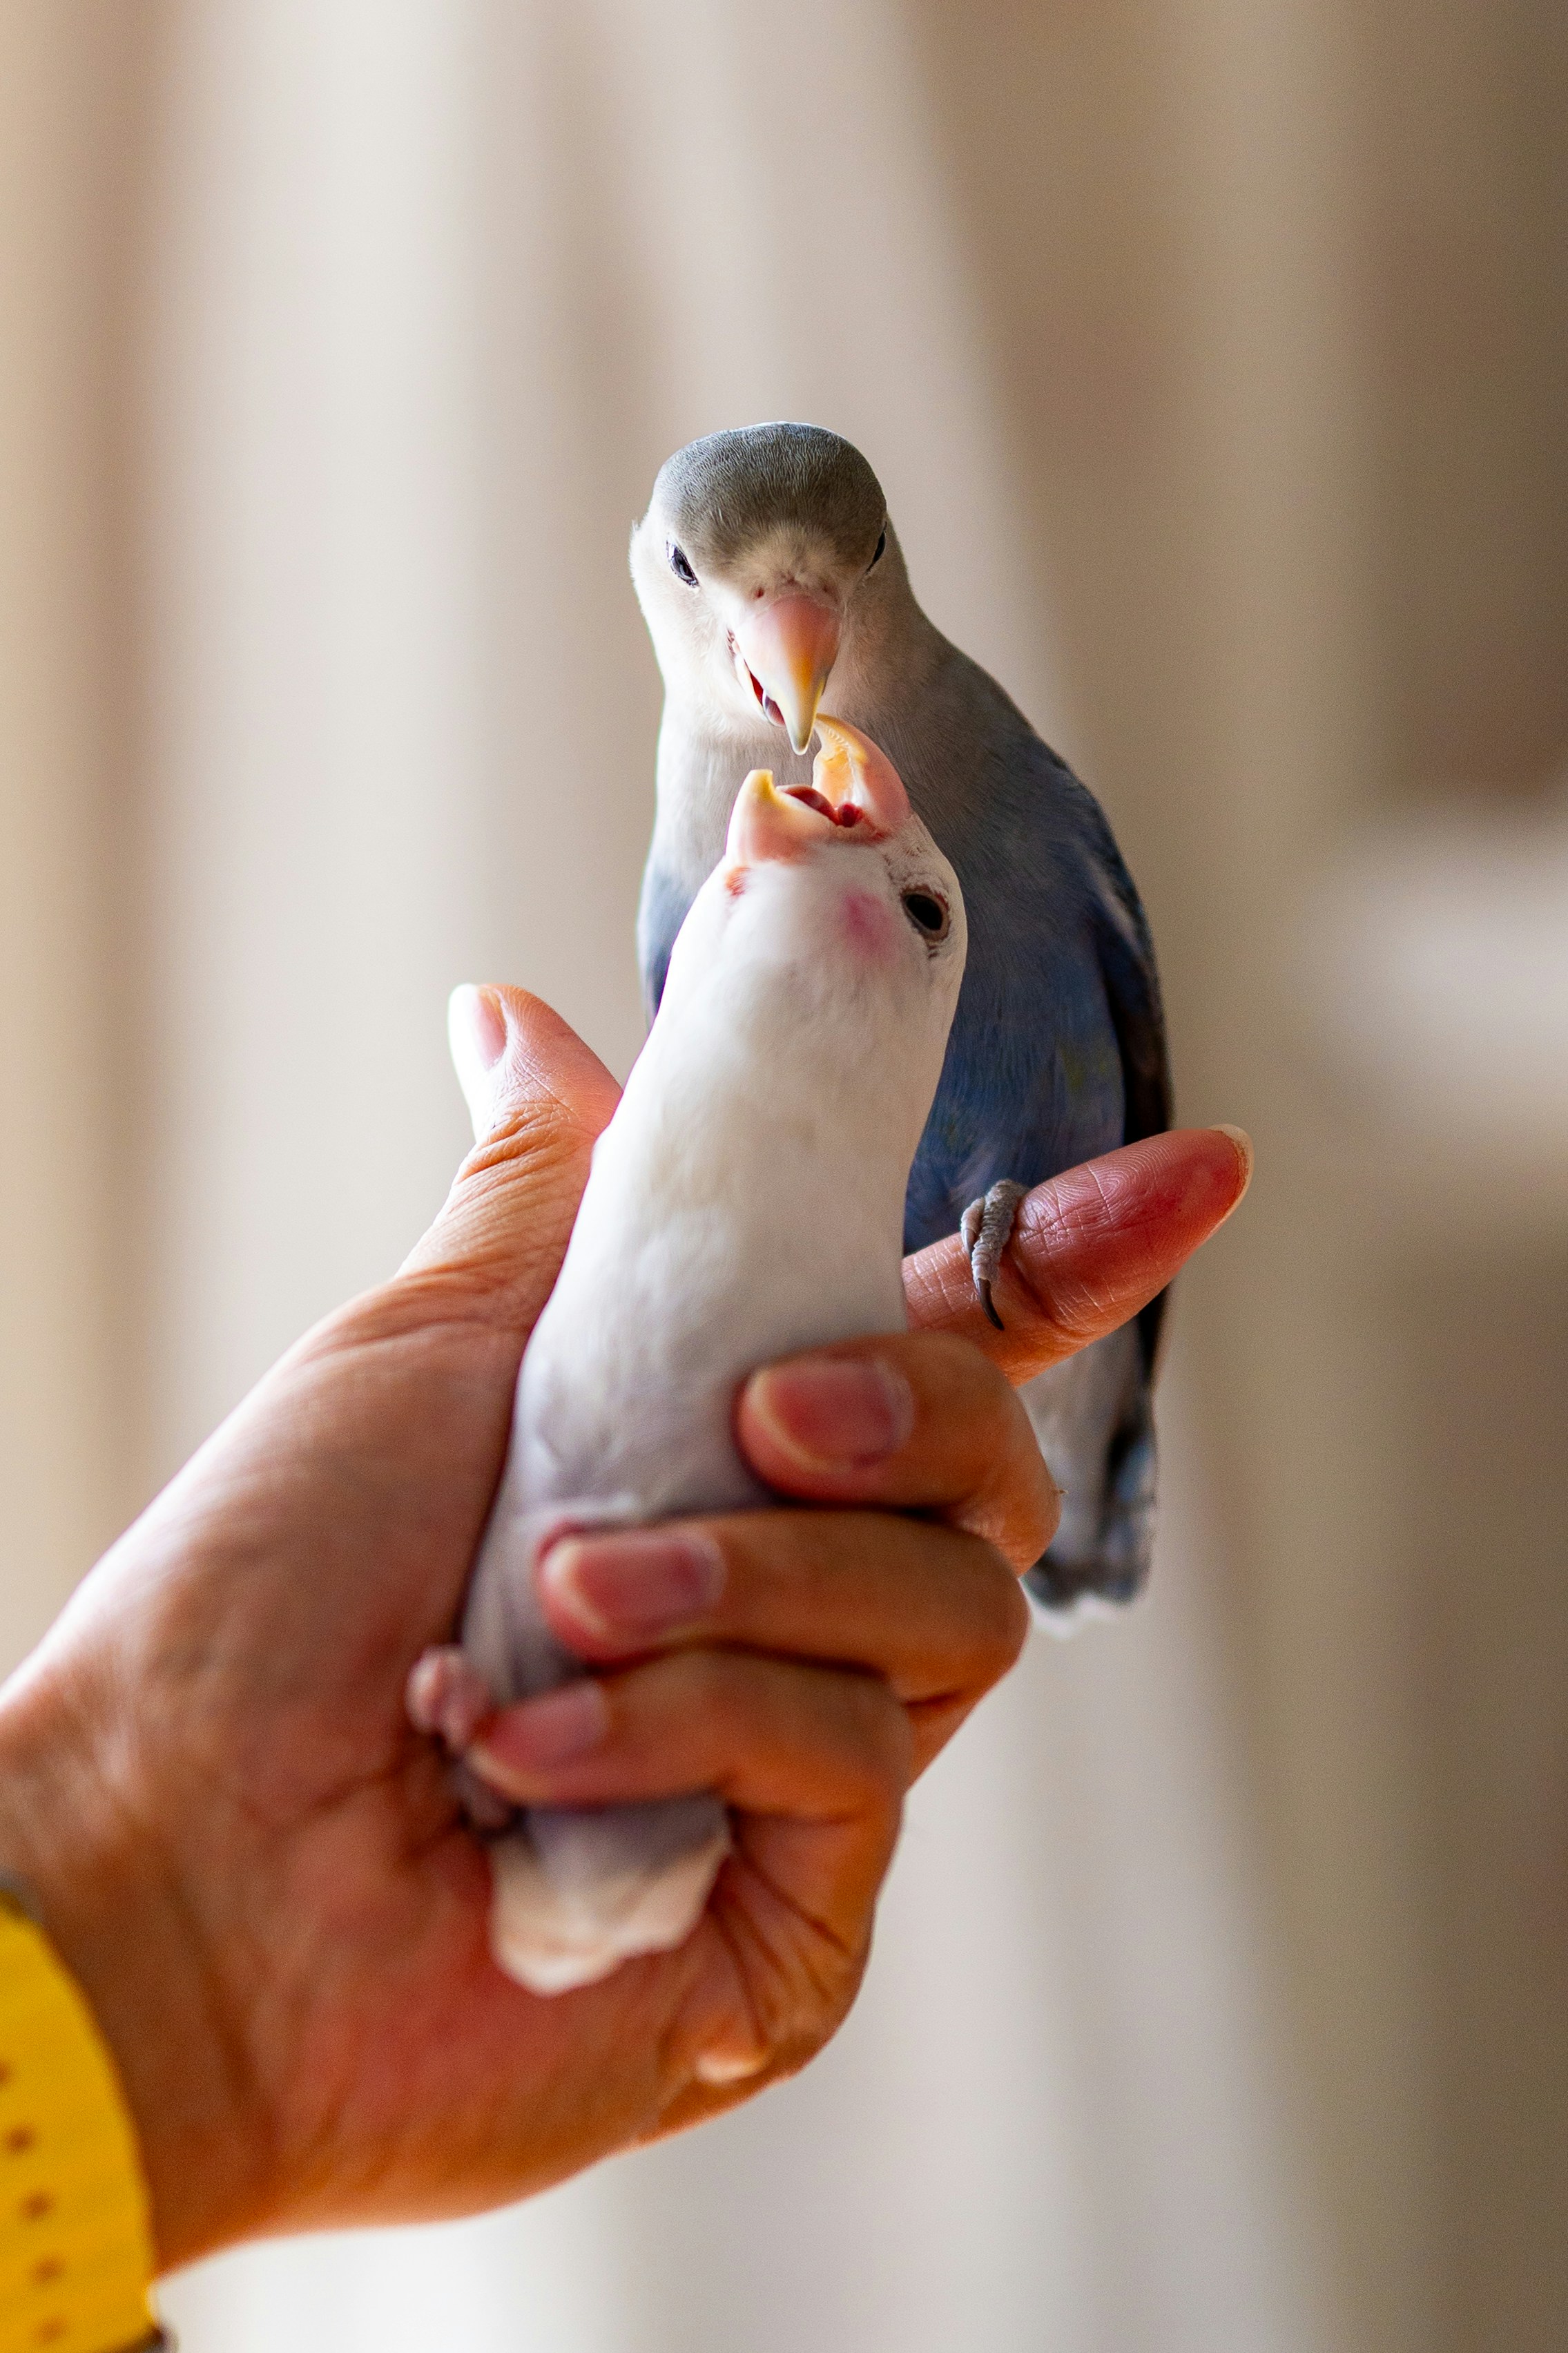 a person holding a small bird in their hand